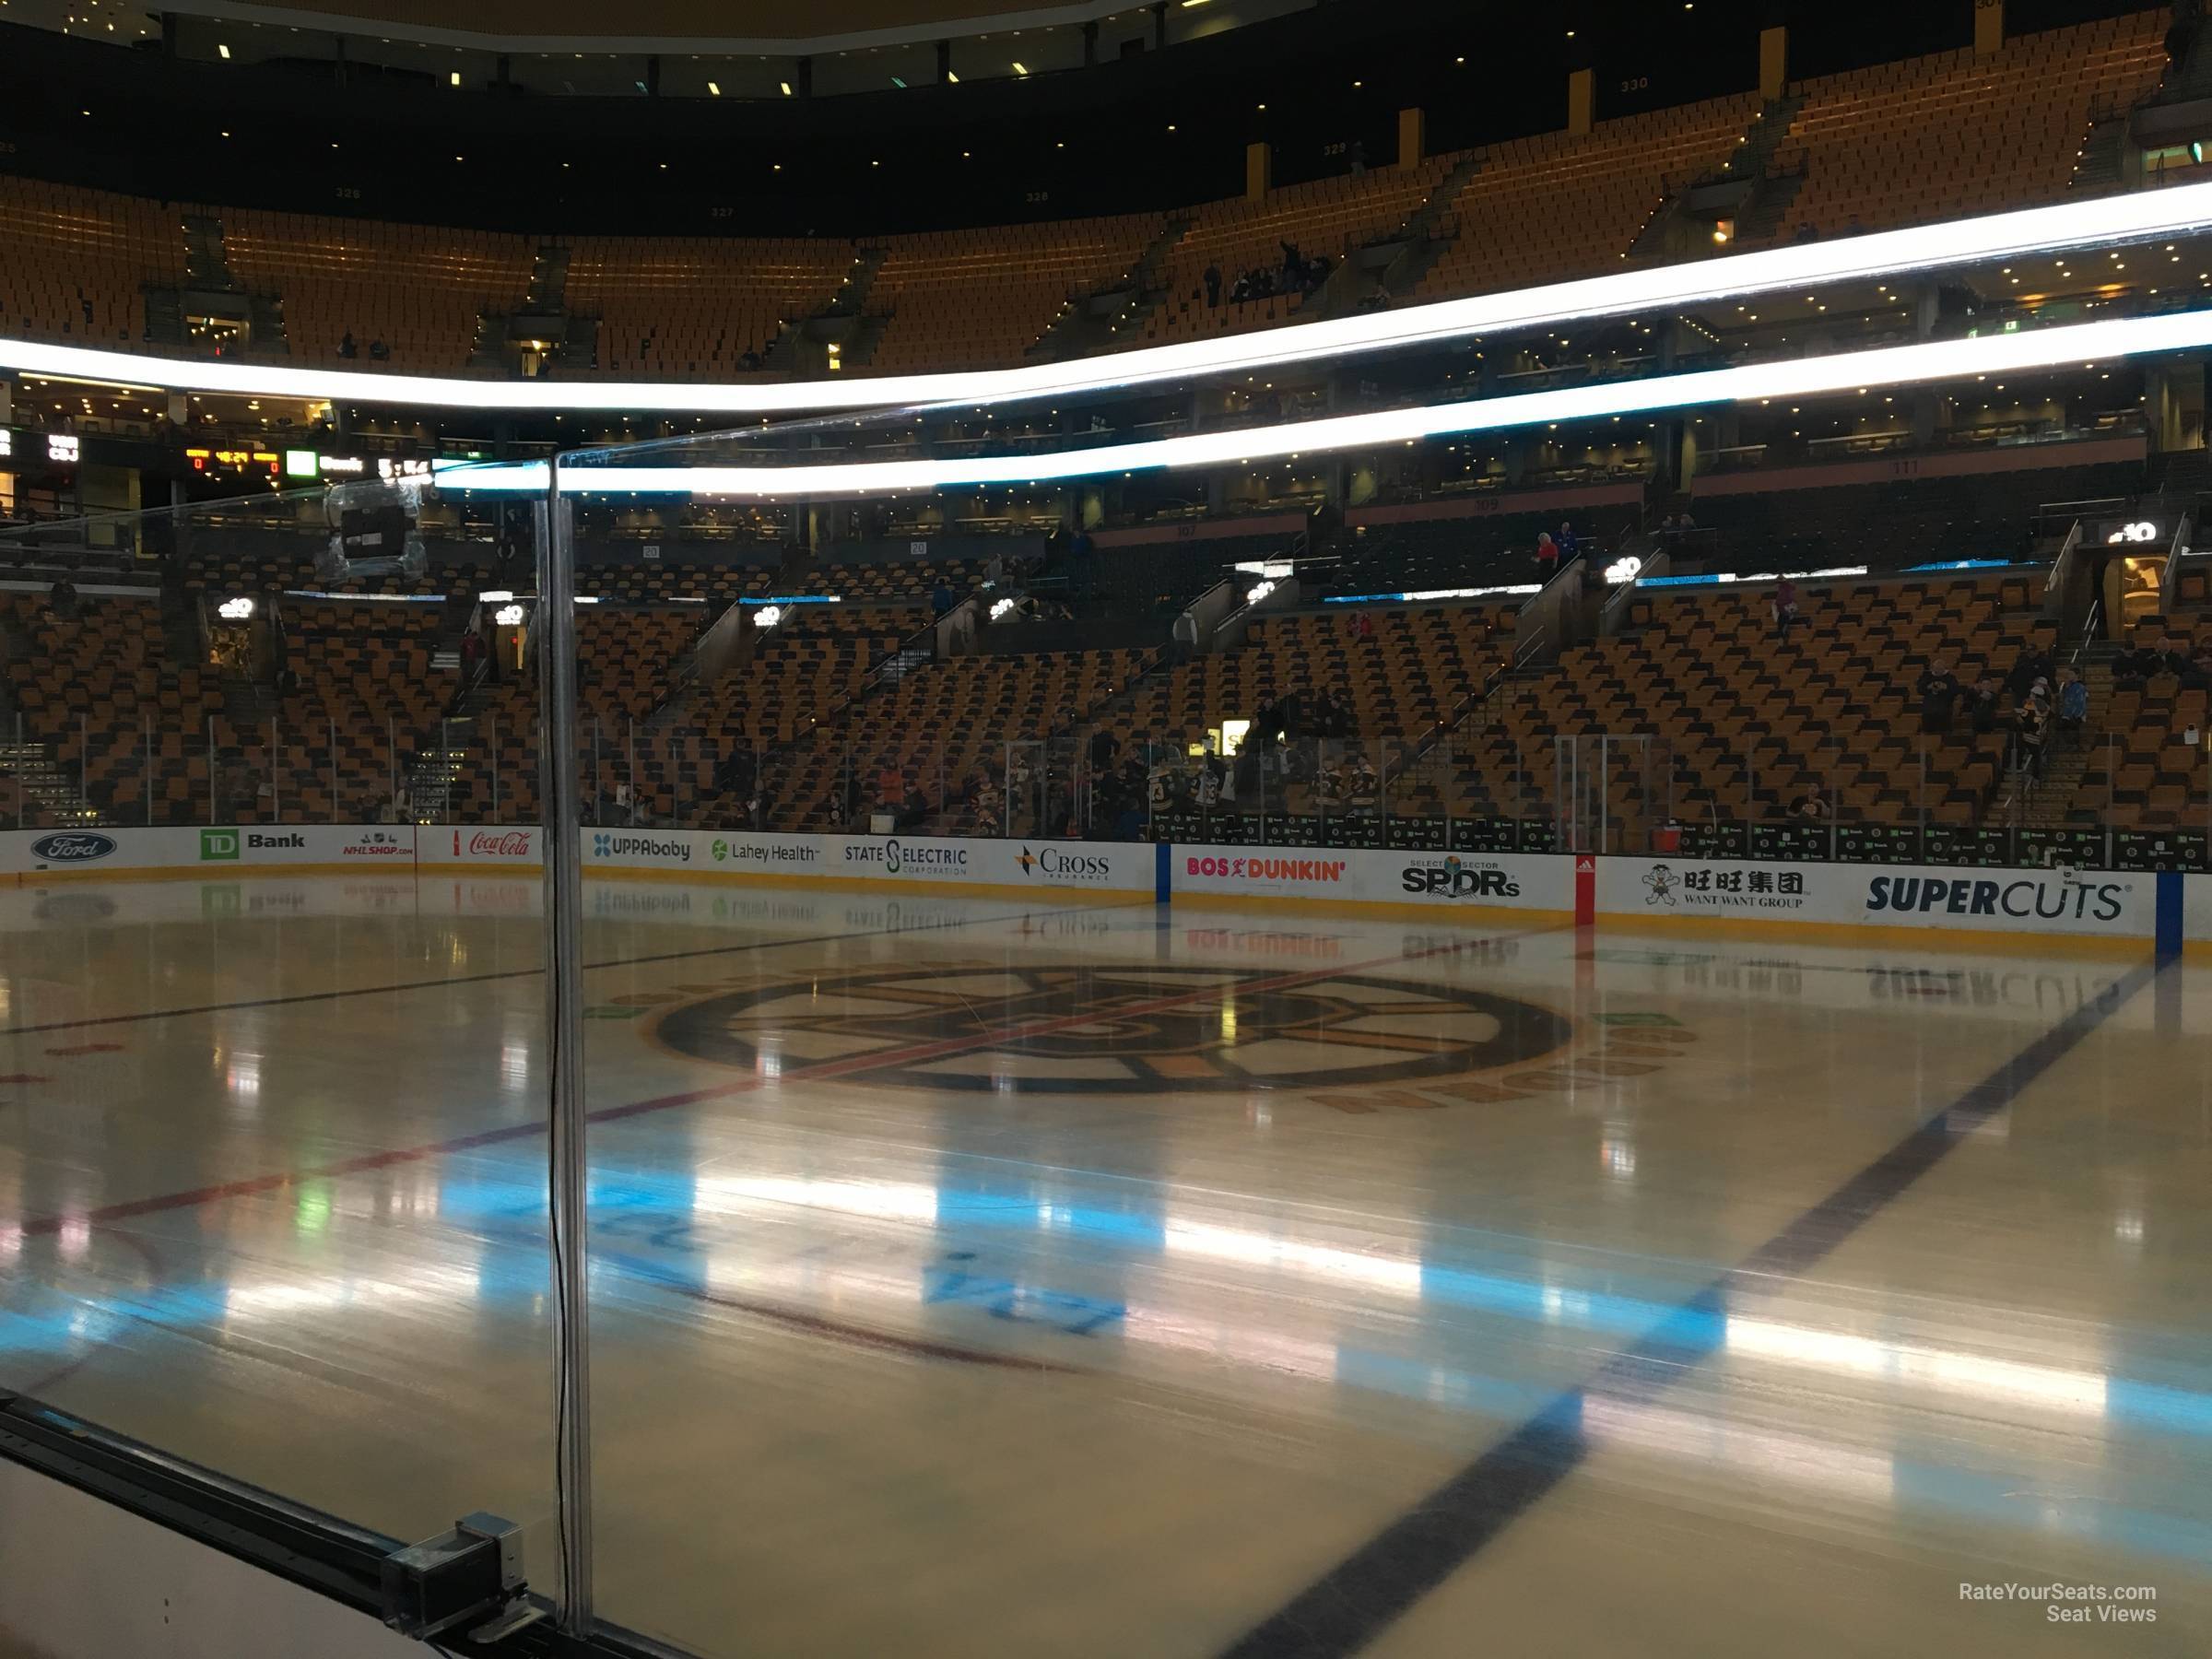 loge 11, row 3 seat view  for hockey - td garden